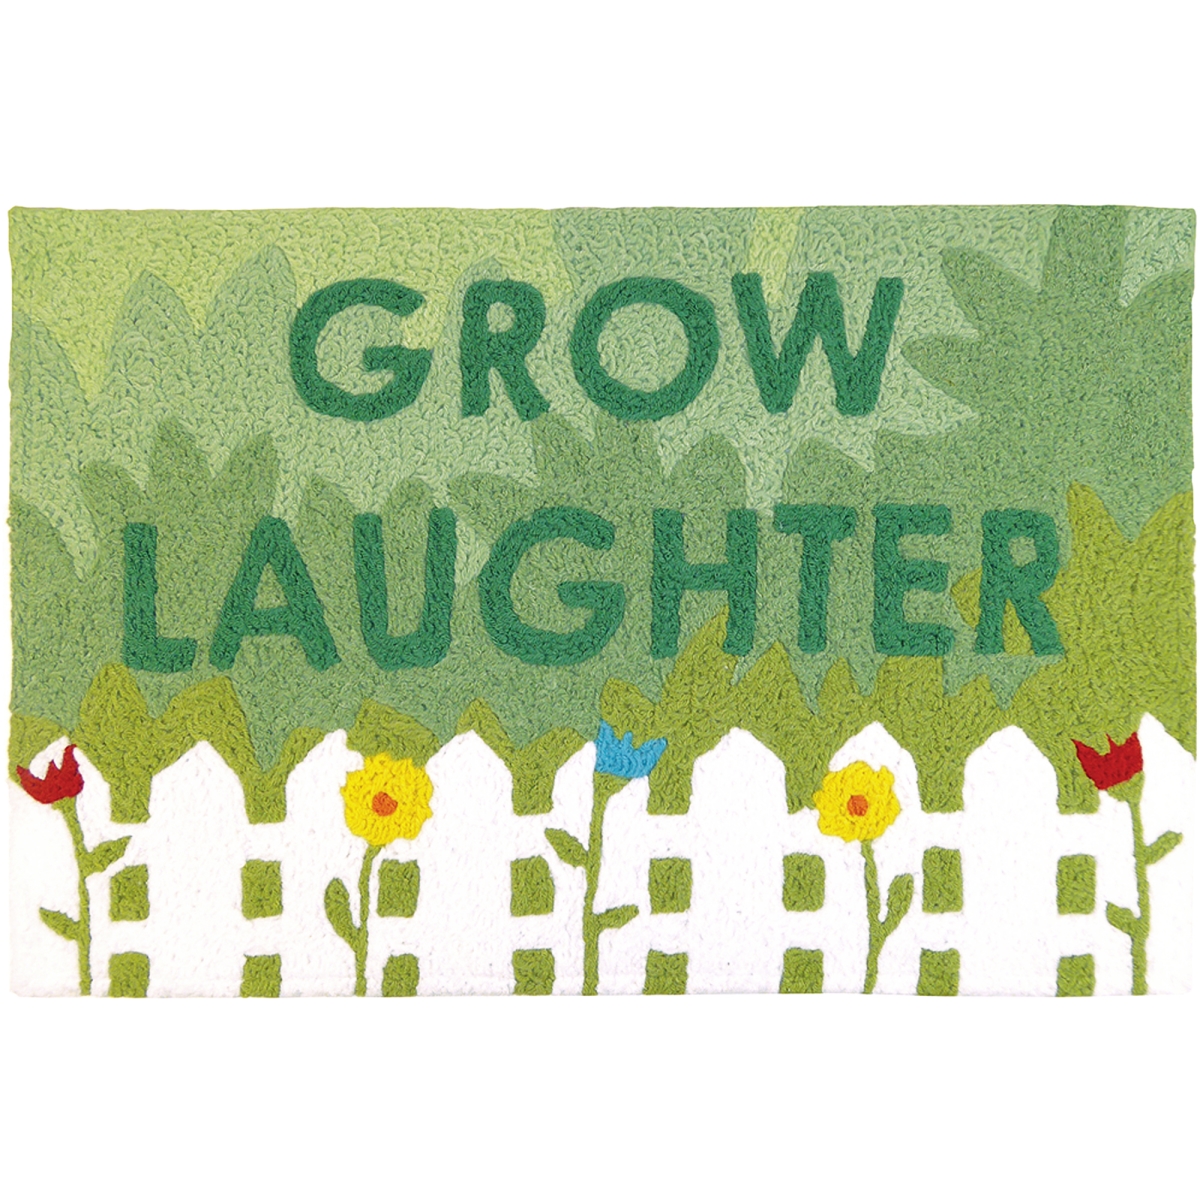 Jb-hc084 20 X 30 In. Grow Laughter Rug